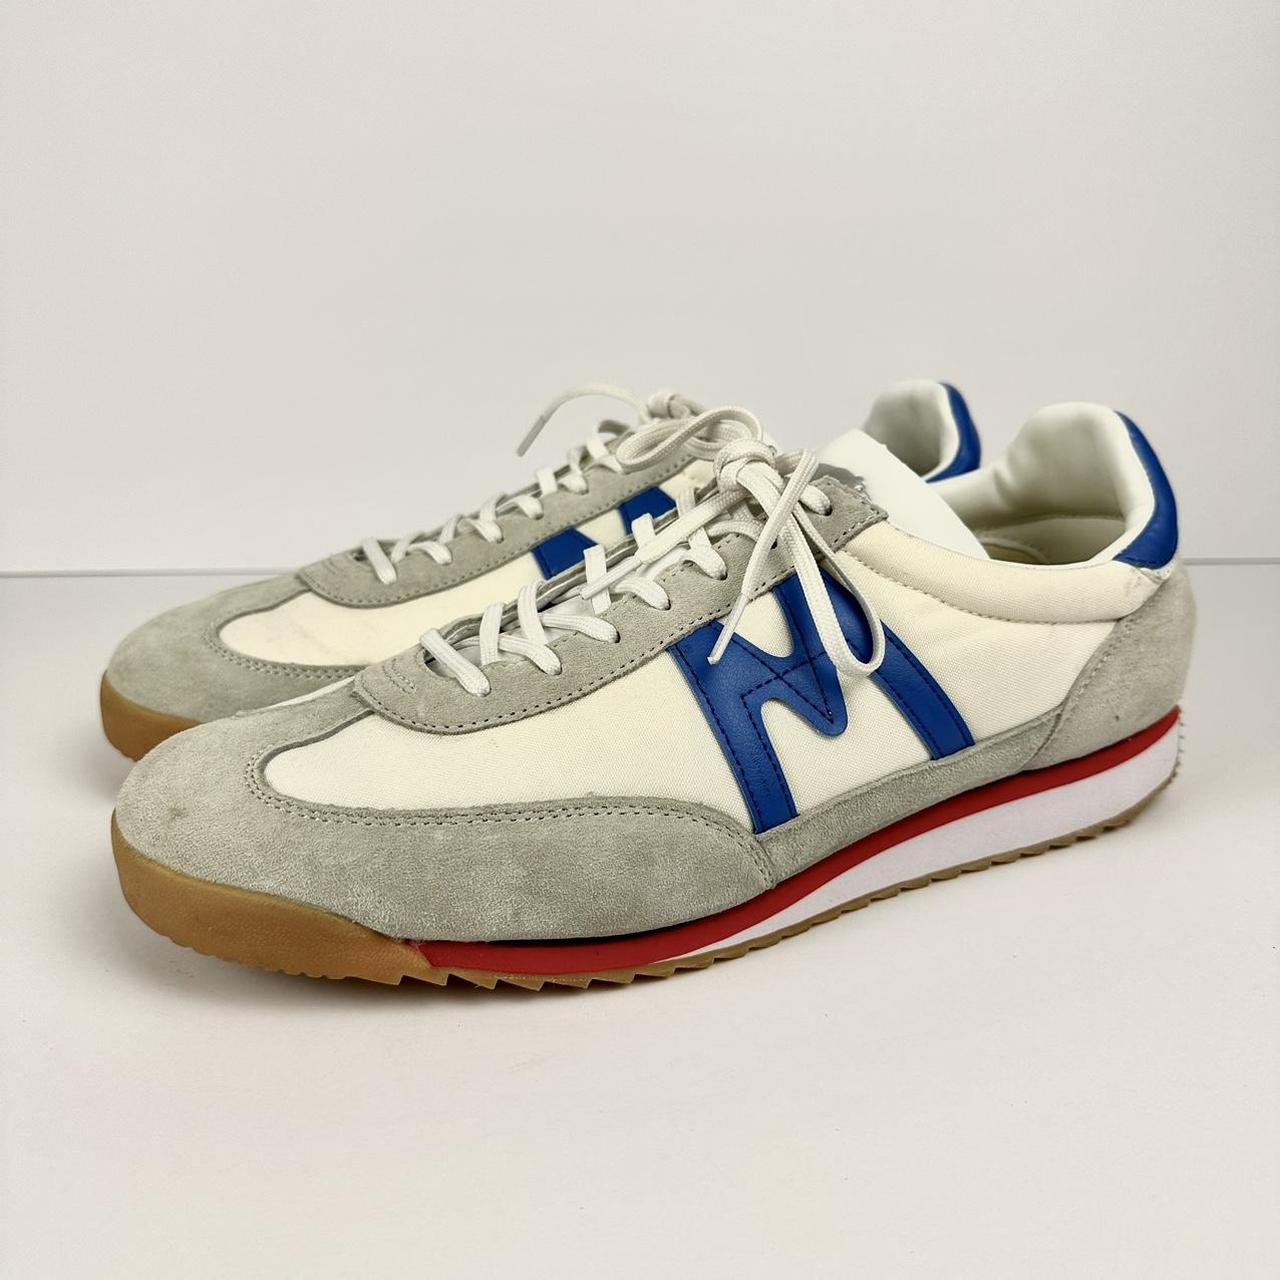 Karhu Men's White and Blue Trainers (4)